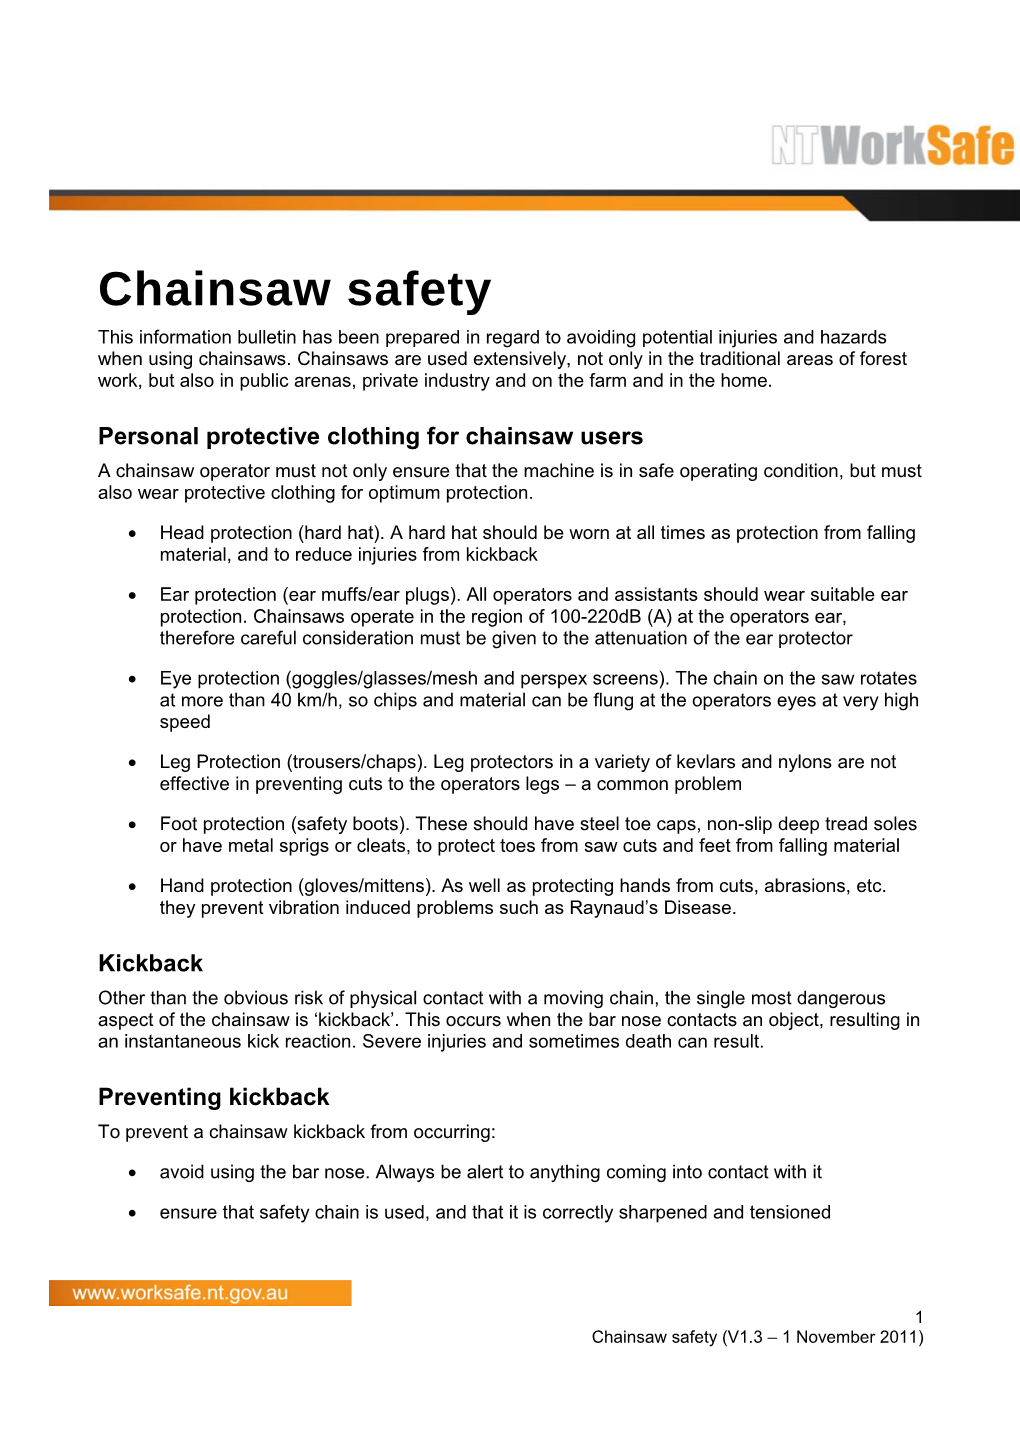 Personal Protective Clothing for Chainsaw Users